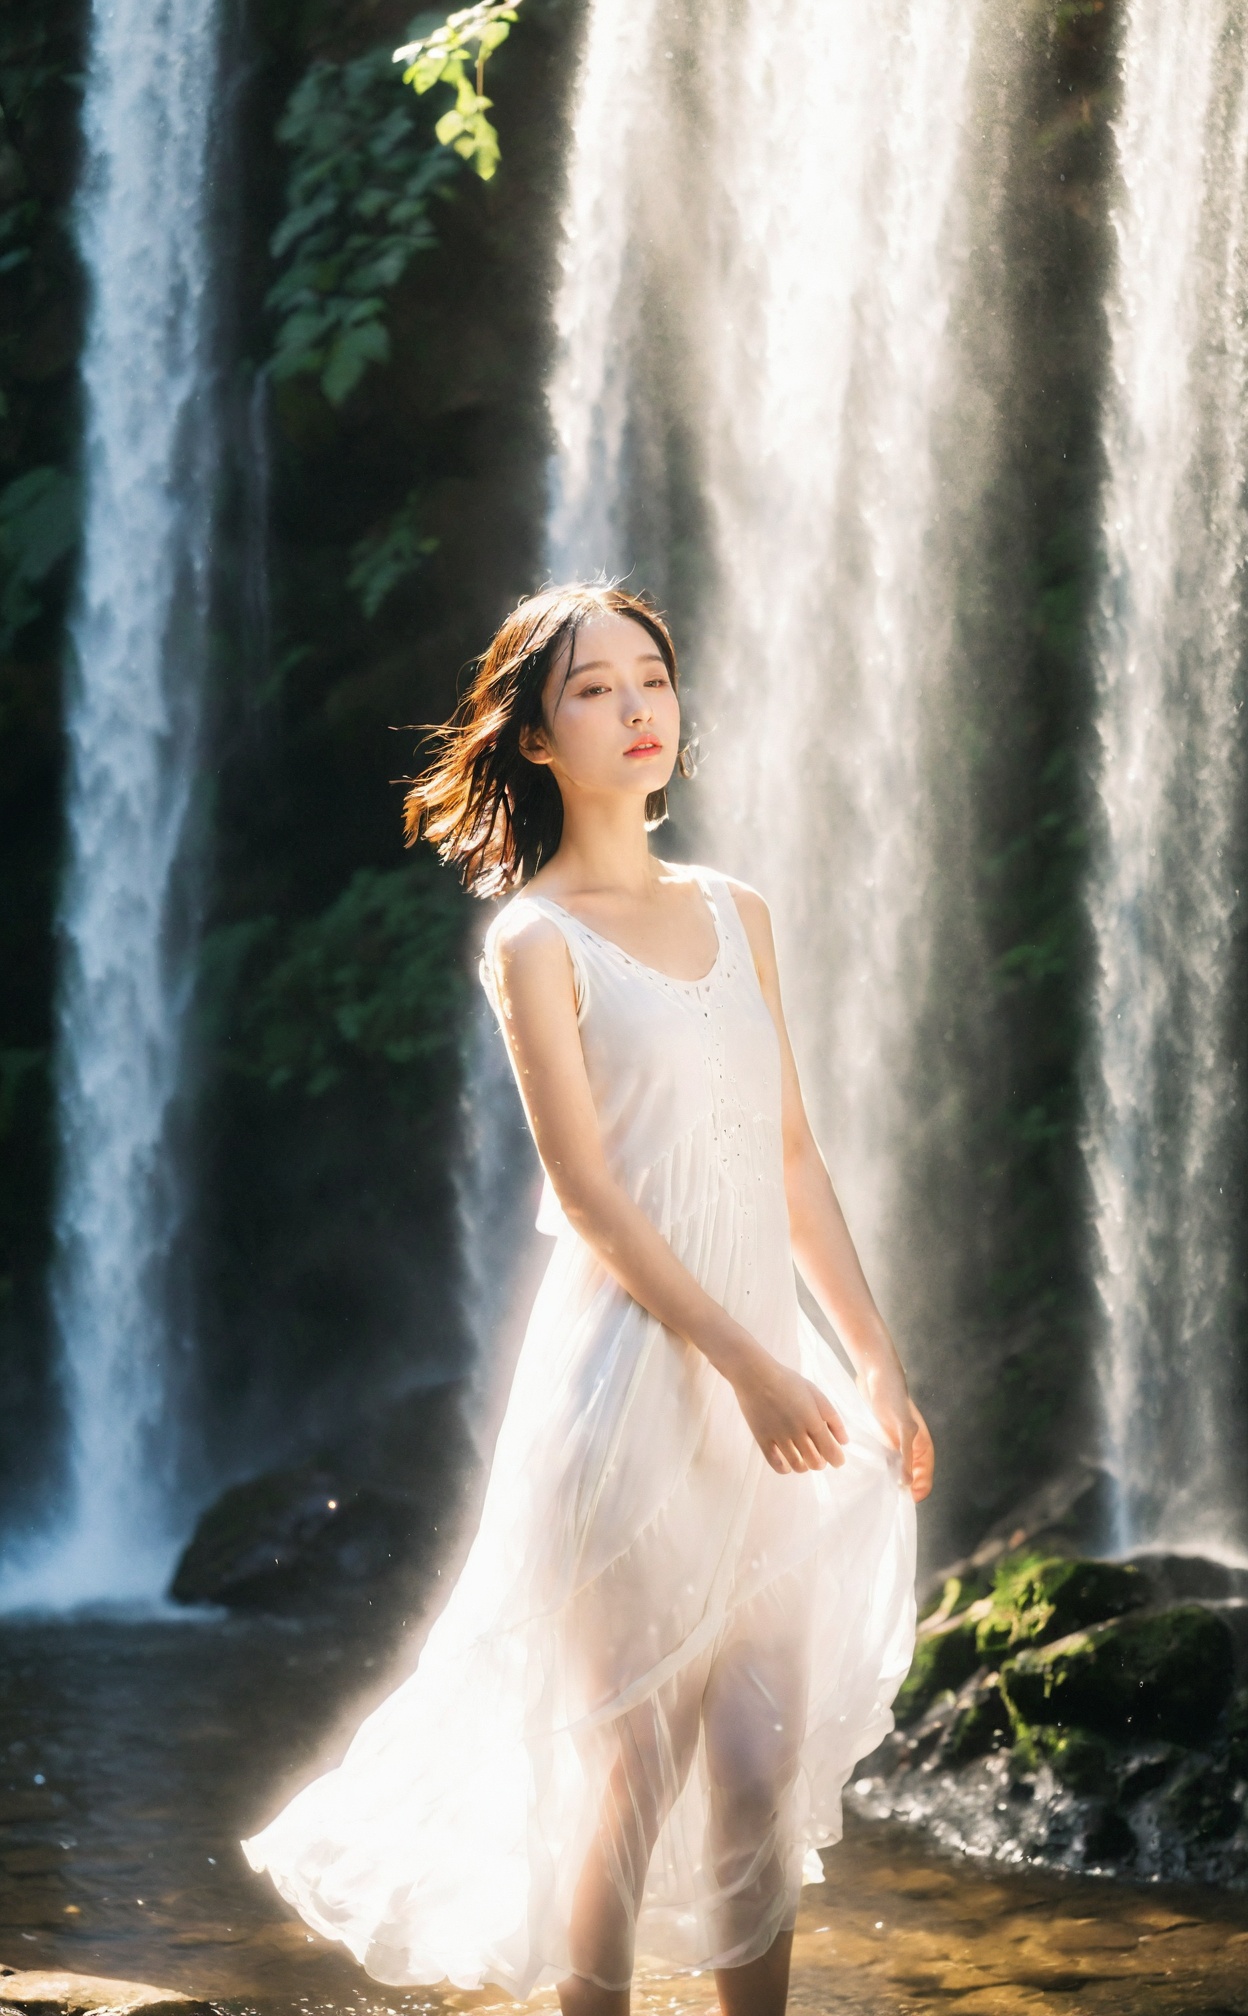 mugglelight, a girl in a flowing white dress, standing under a cascading waterfall, backlit by the sunlight, water droplets sparkling in the air, natural beauty.korean girl,black hair,